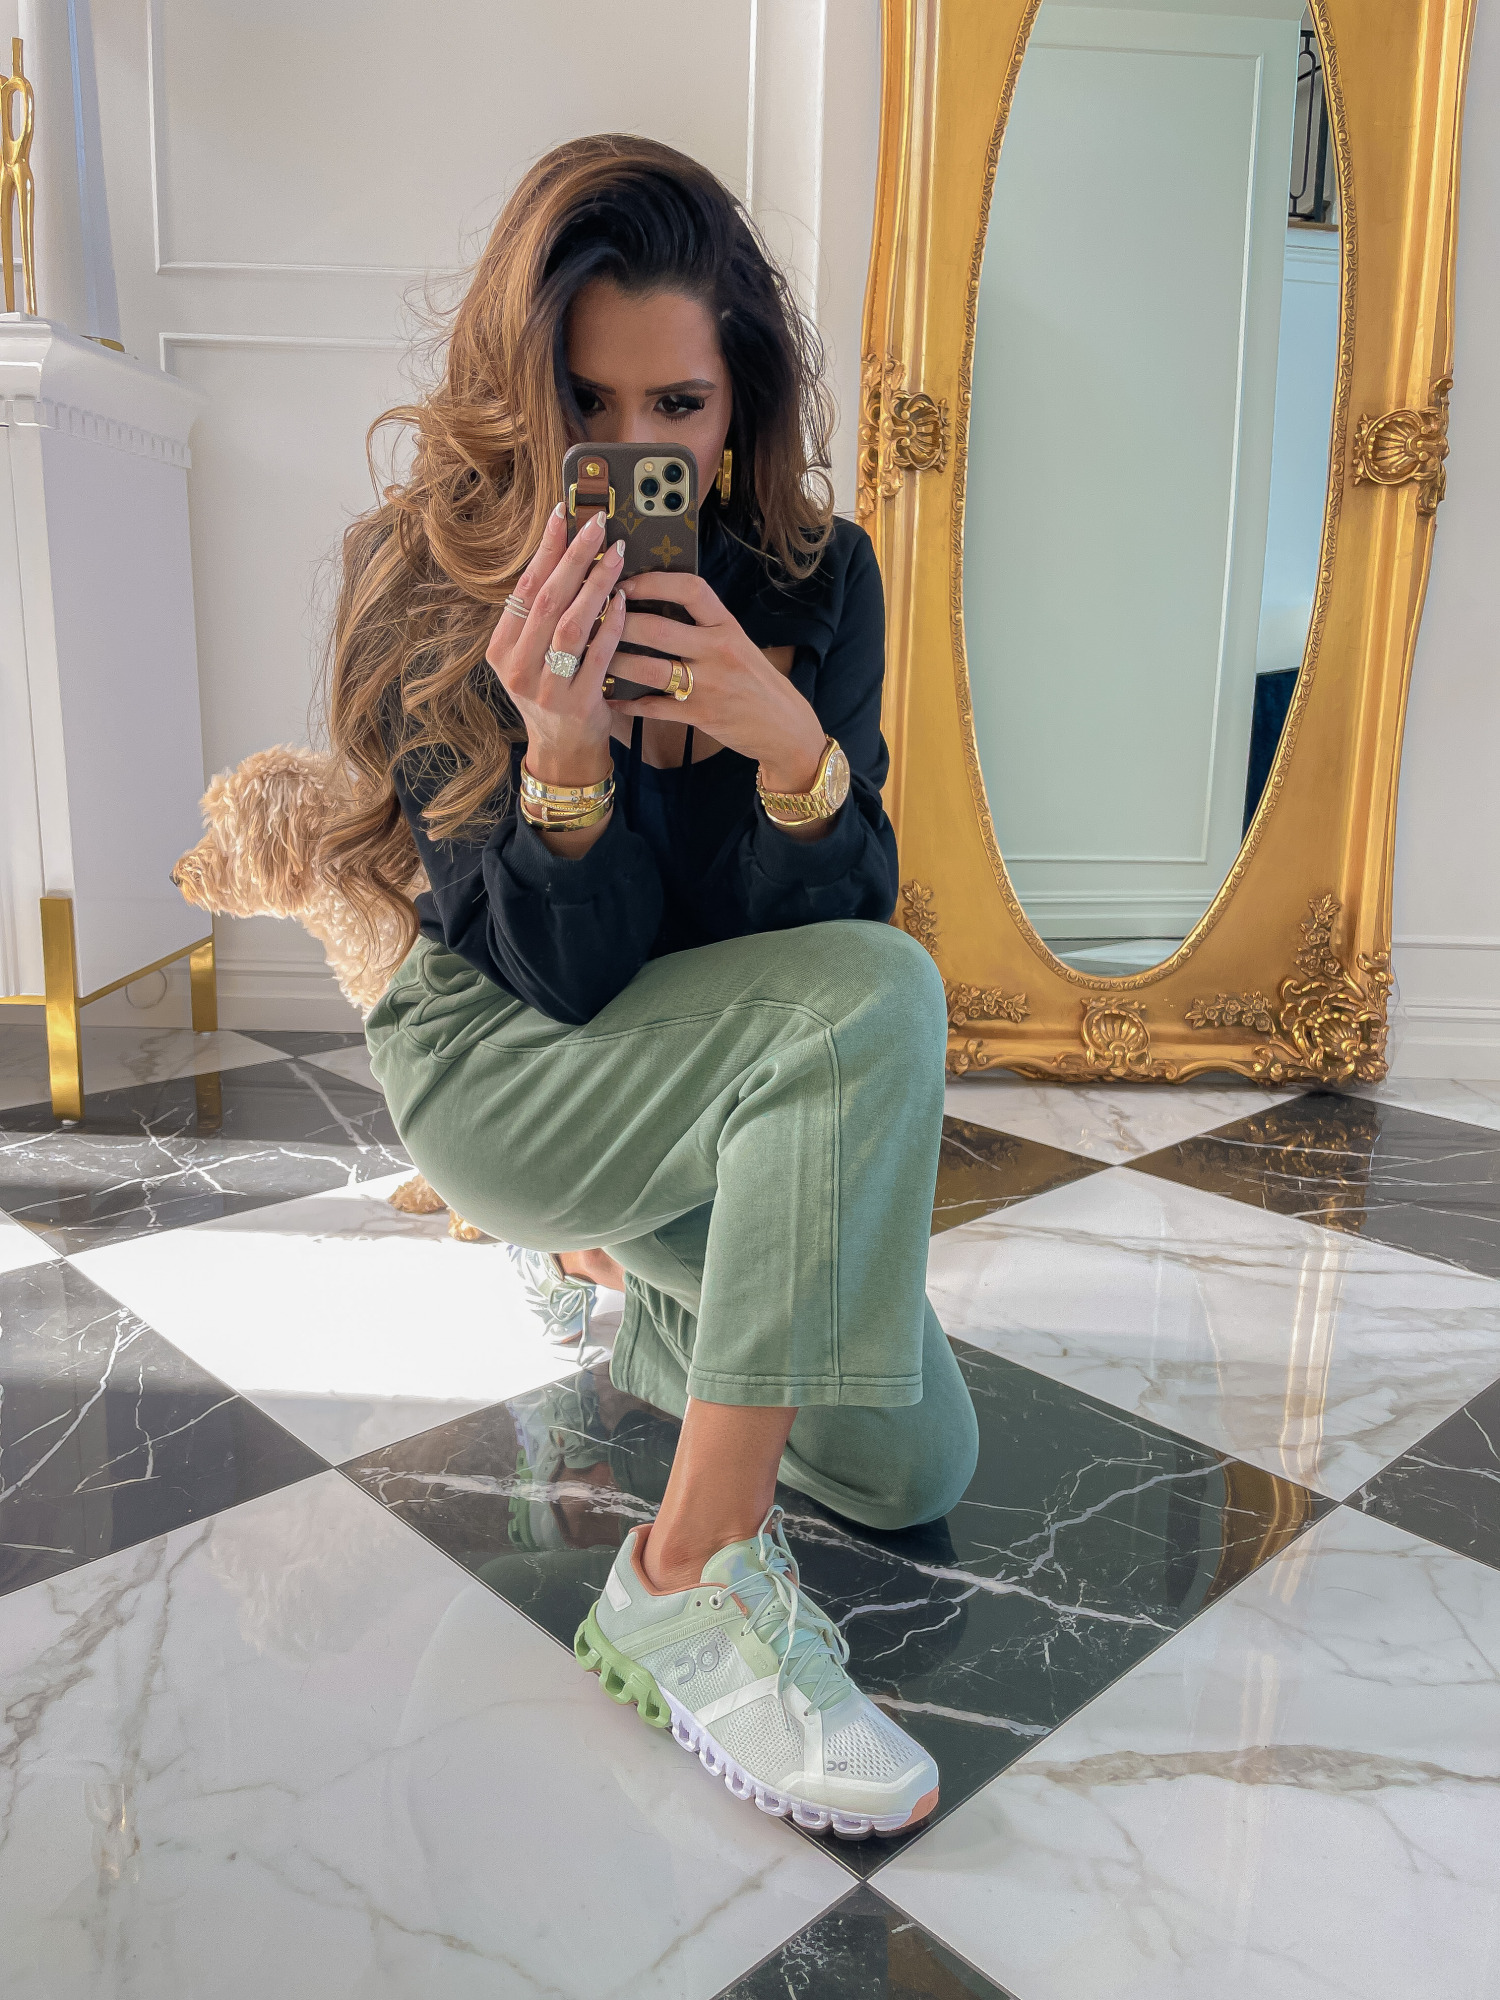 dstrom Anniversary Sale 2021 Picks, best of NSALE 2021, Nordstrom sale on cloud shoes reivew, Emily gemma | Nordstrom Anniversary Sale US fashion blog, The Sweetest Thing: image of Emily Gemma wearing a Nordstrom peekaboo hoodie, drawstring pants, and athletic sneakers. 